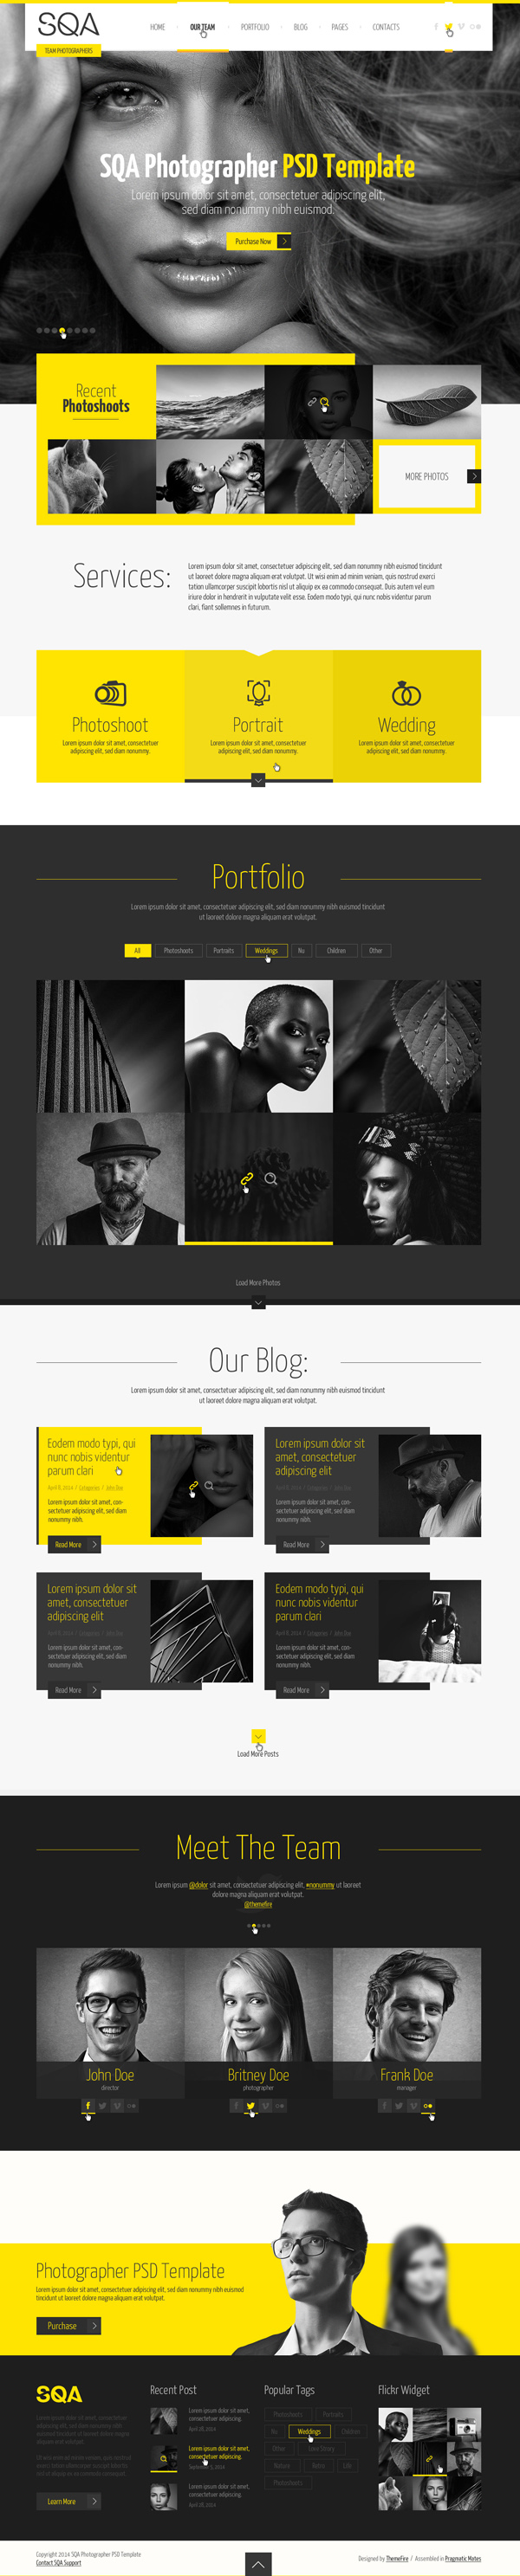 SQA - One Page PSD HTML5 Template